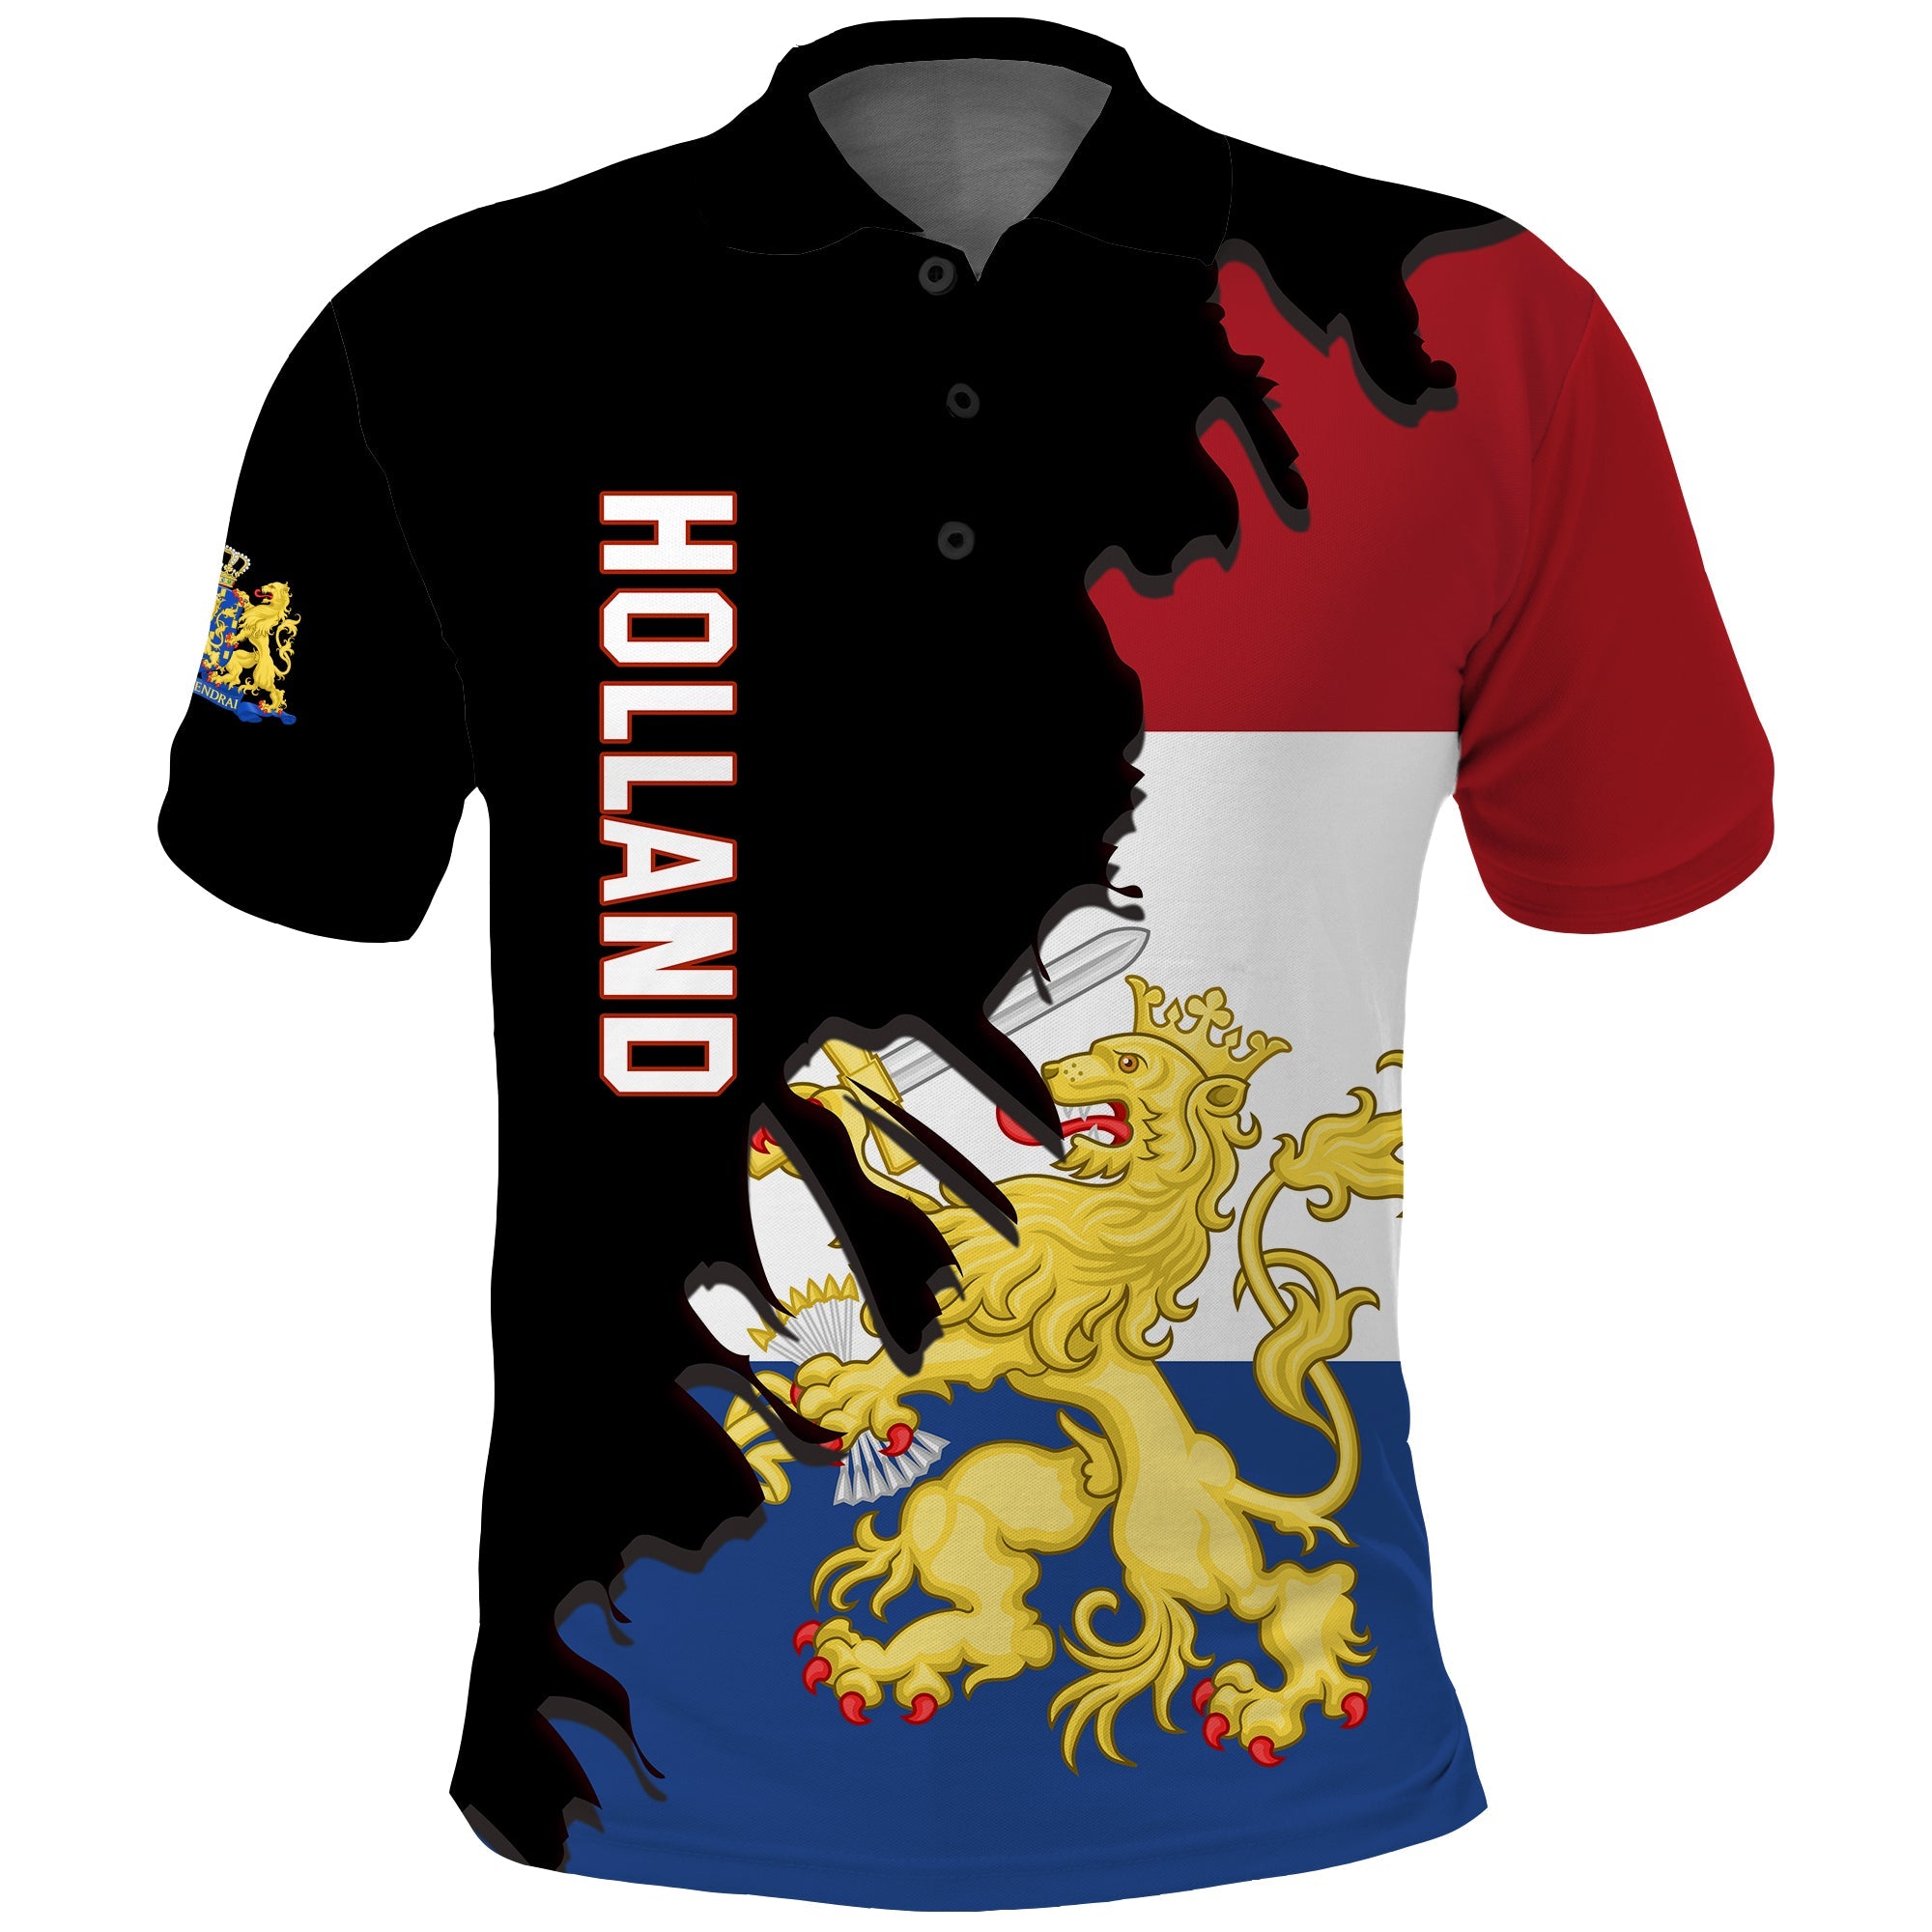 netherlands-polo-shirt-style-flag-and-map-holland